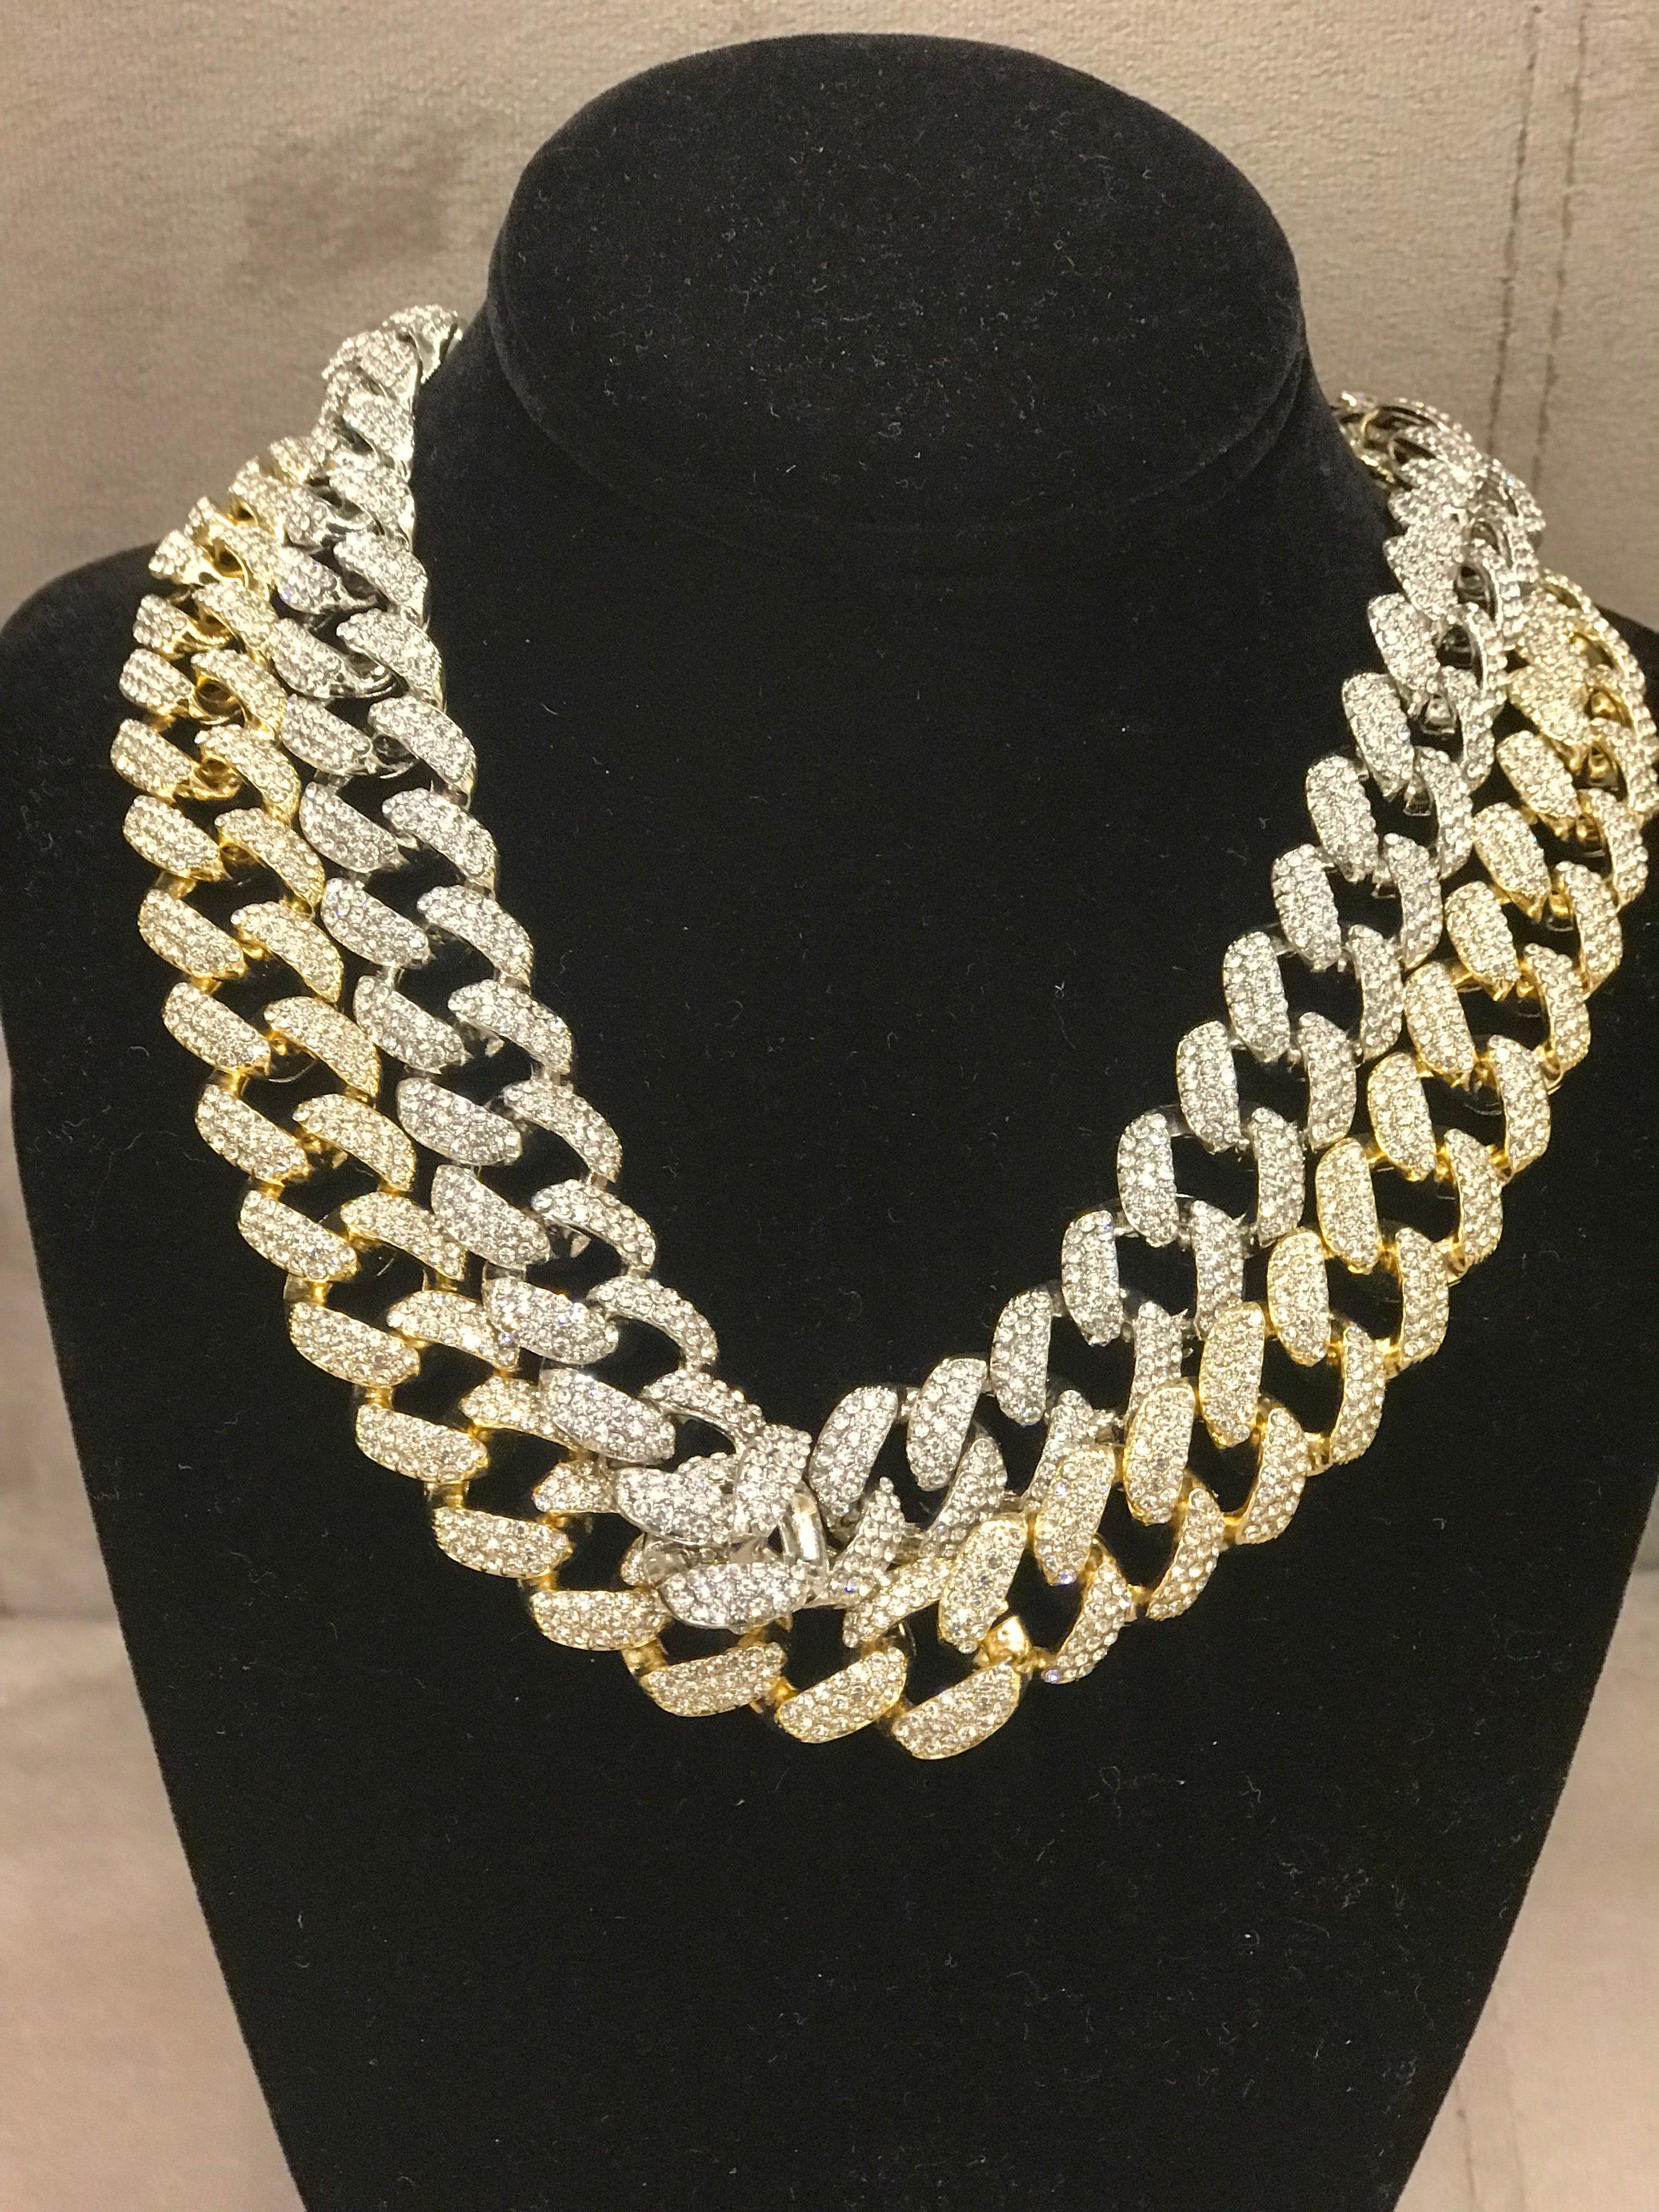 cuban link chain necklace for men and women